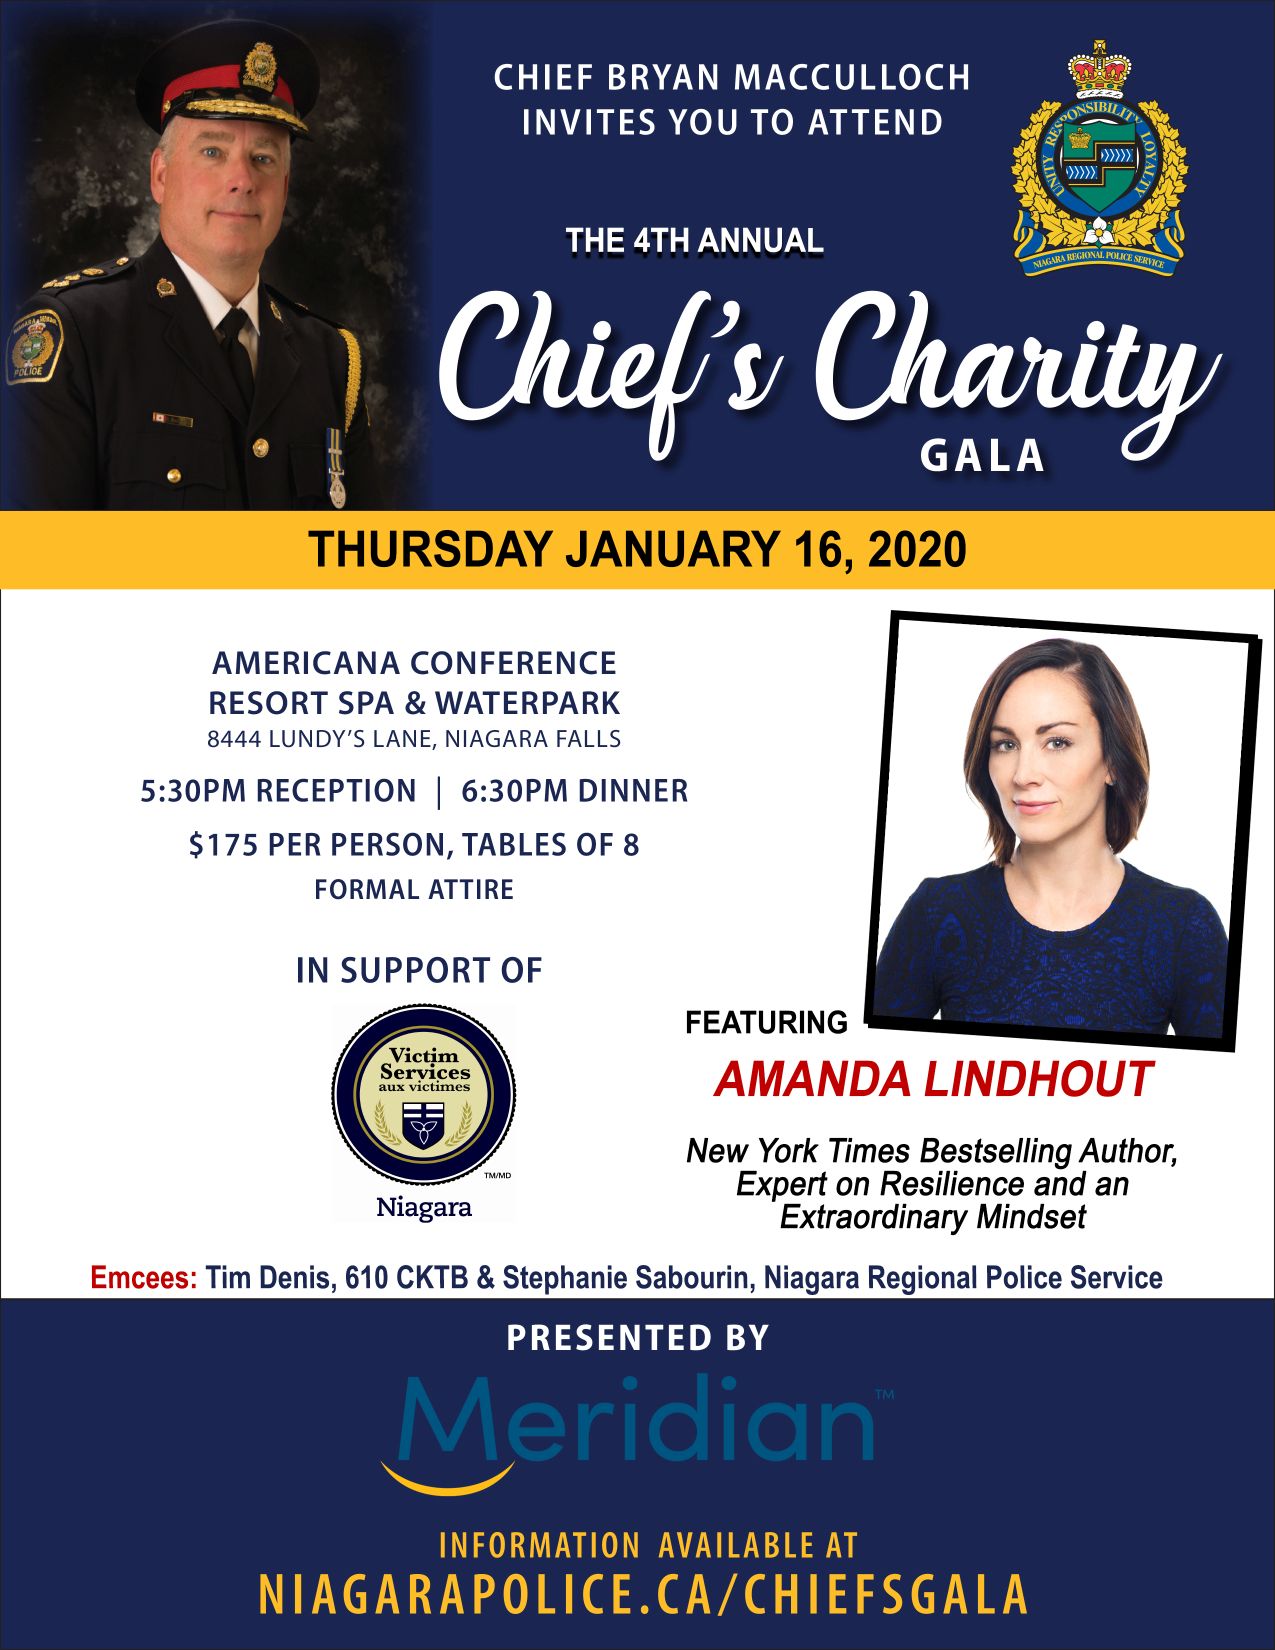 Chief's Gala sponsored by Meridian